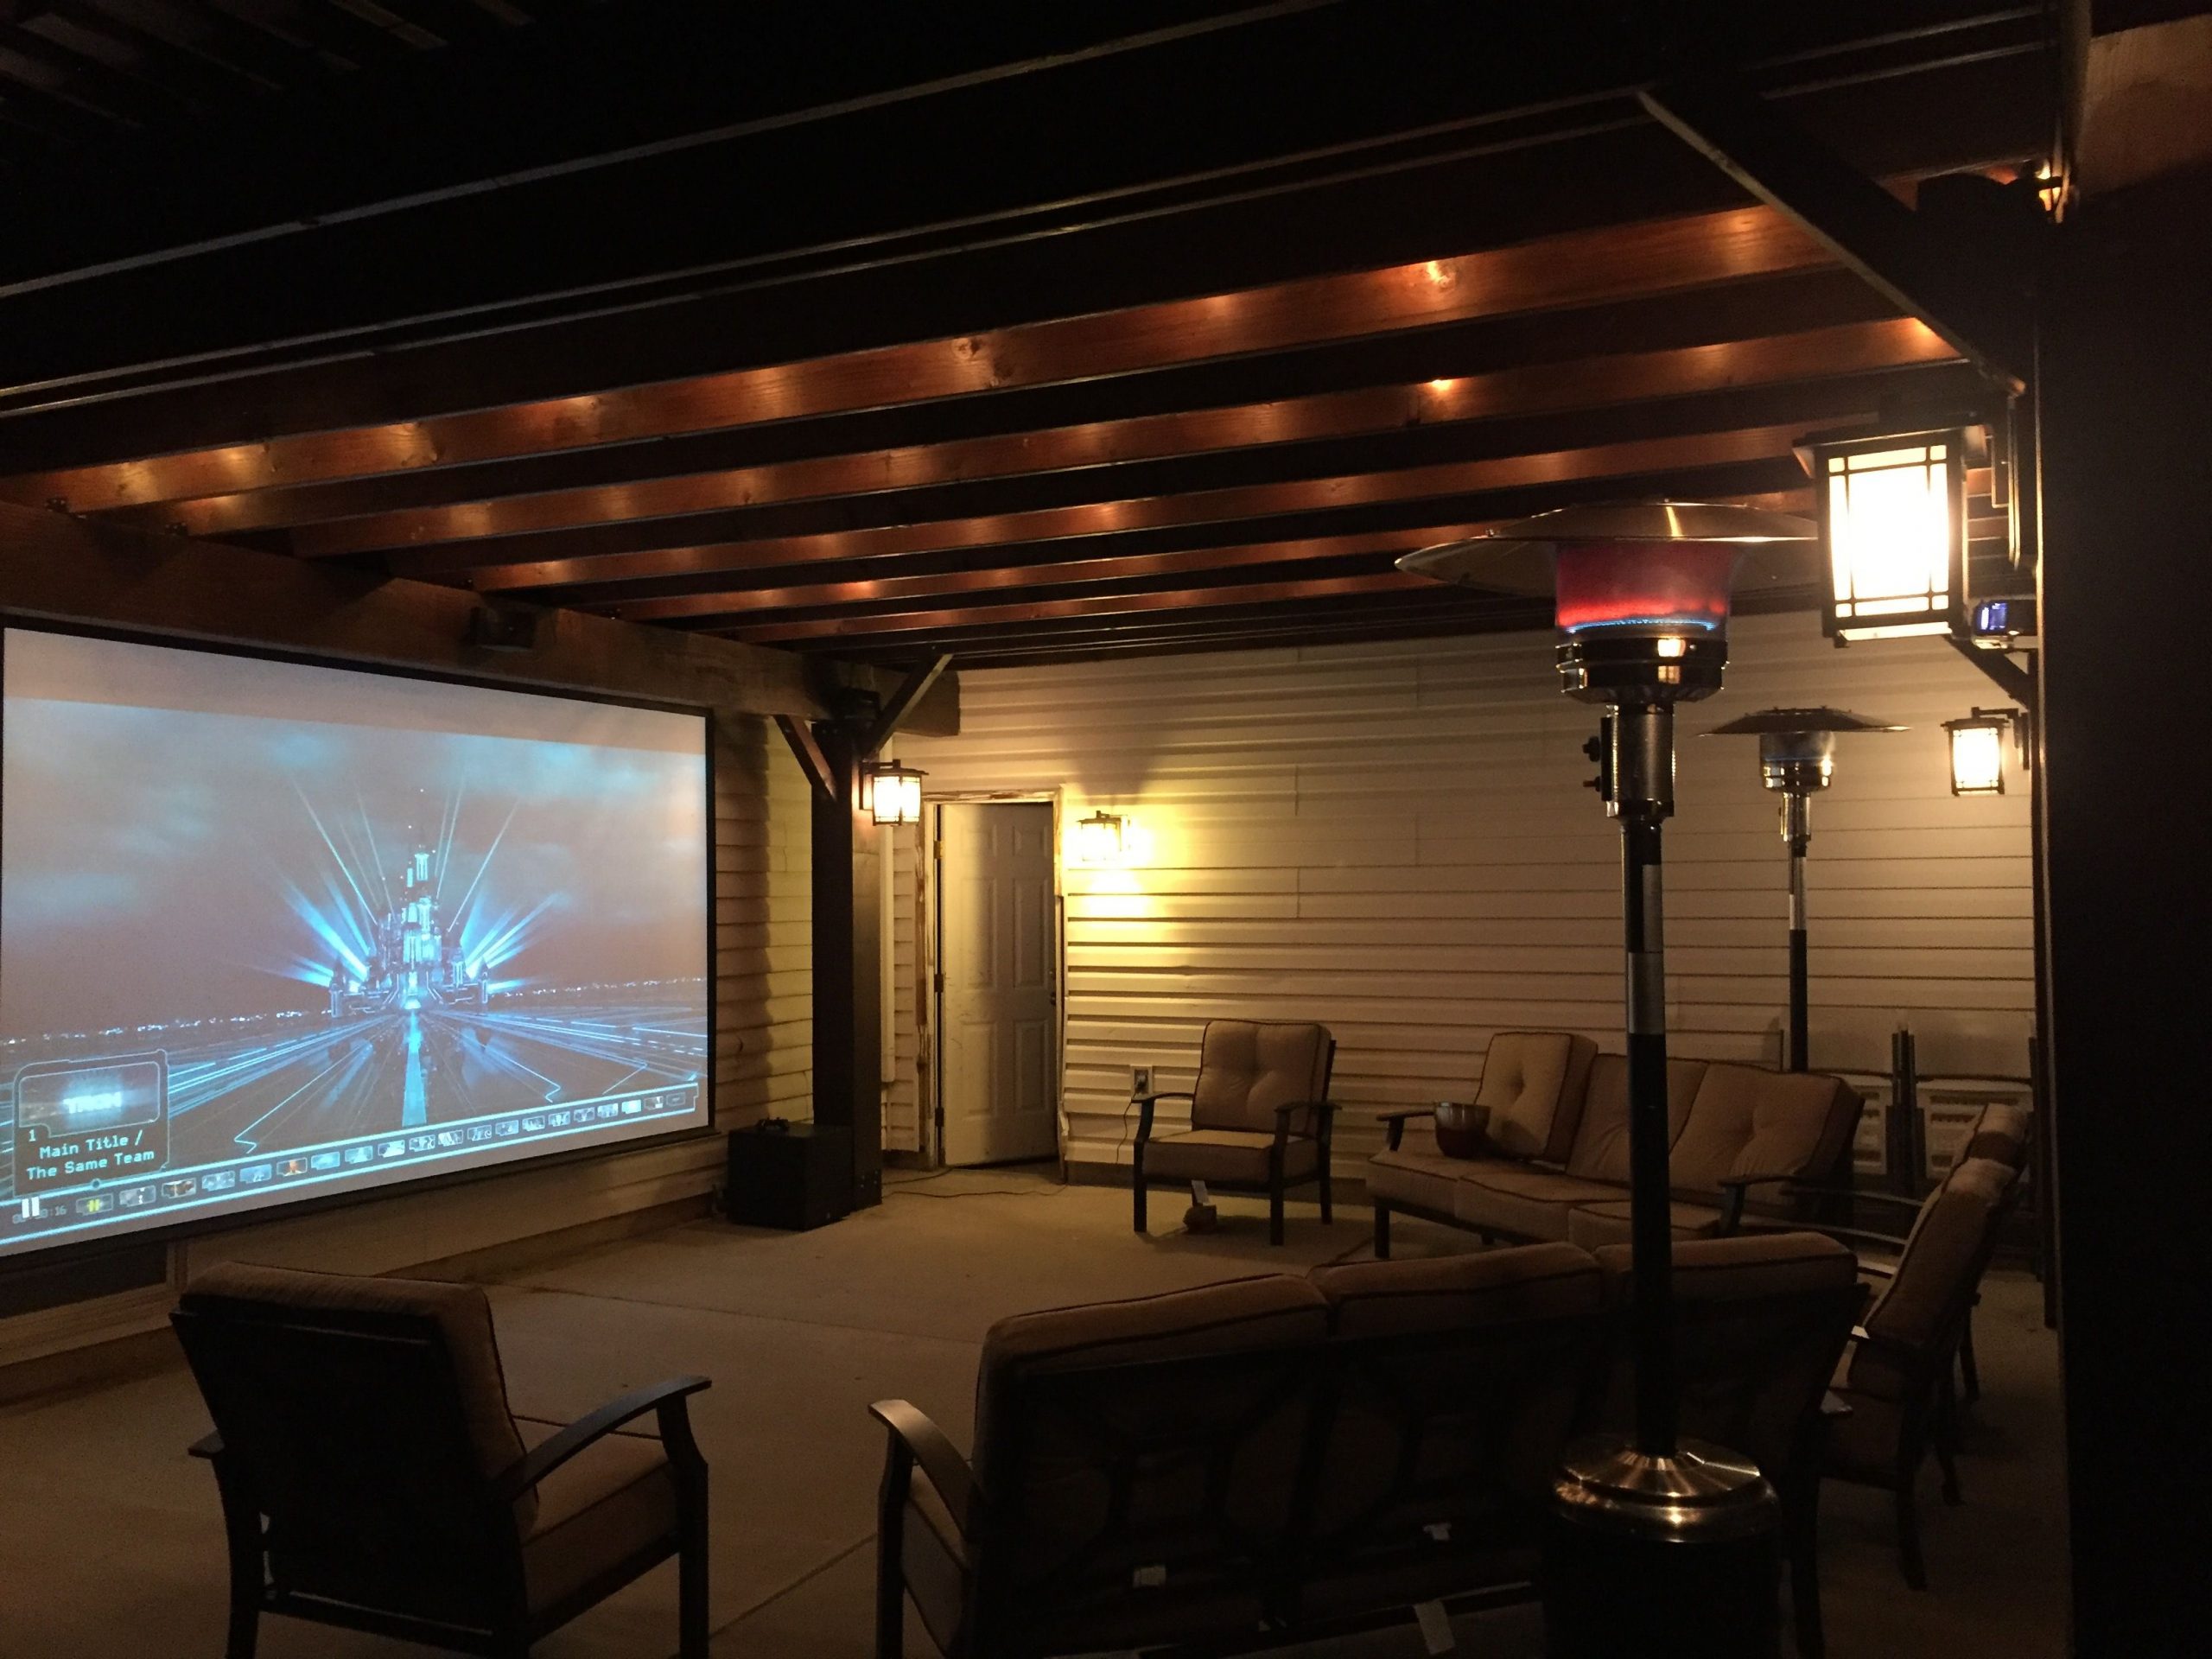 Vital Factors to Consider While Buying Outdoor Projector Screen